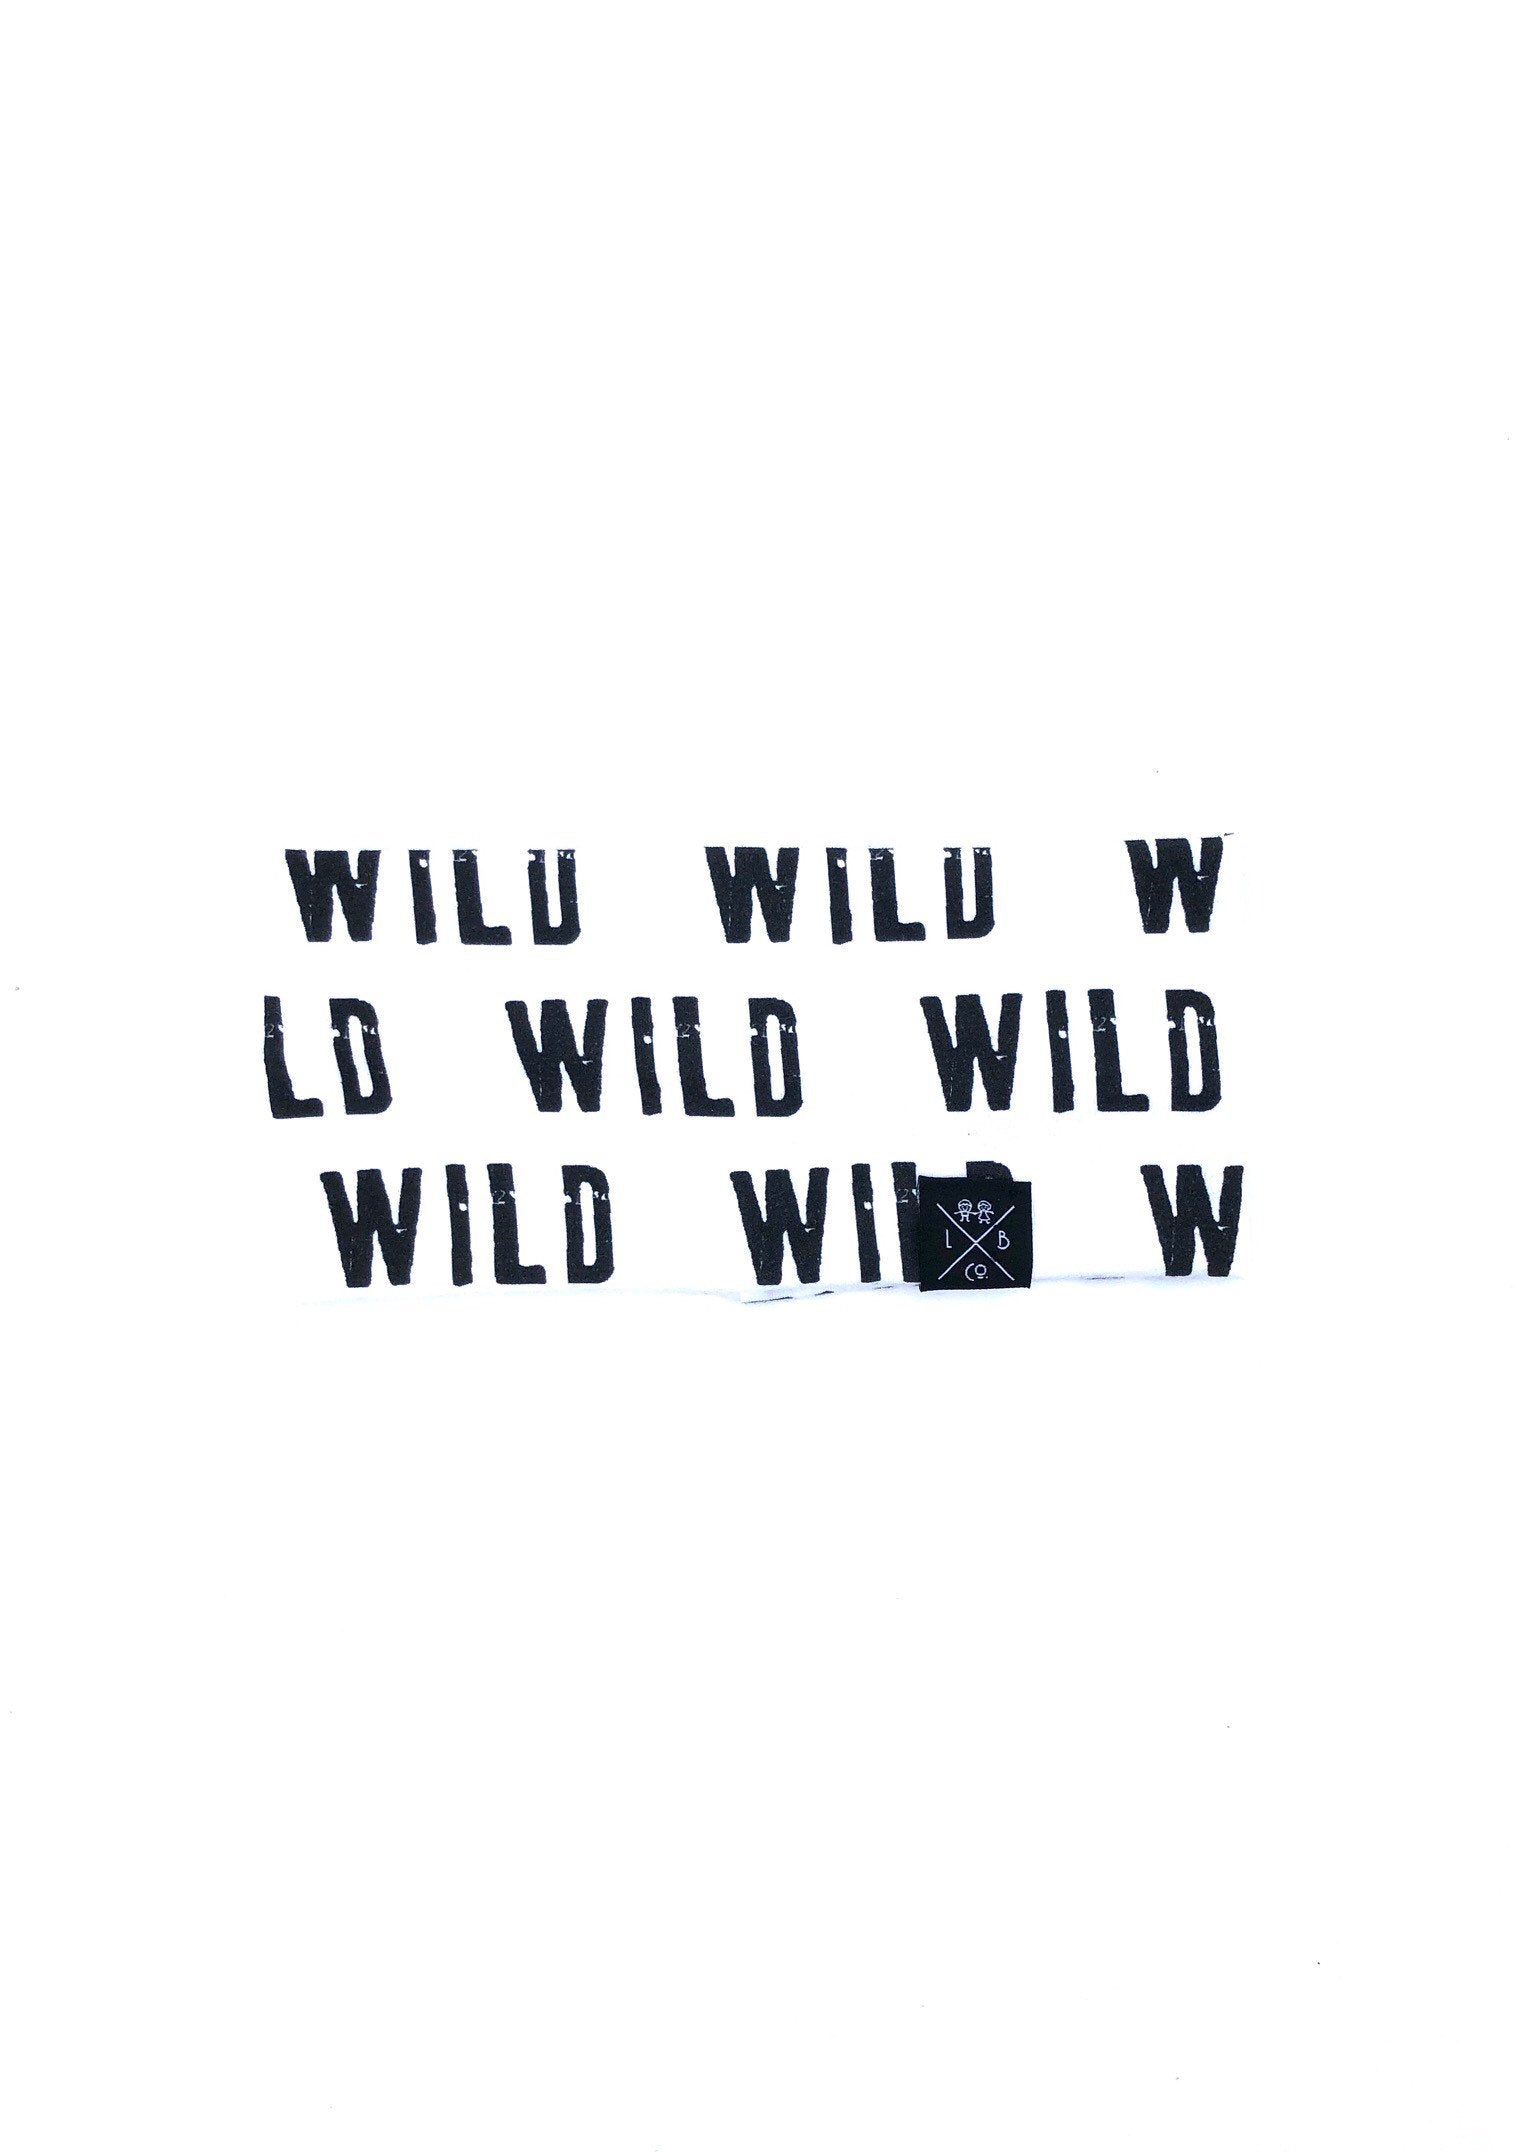 Wild boys headband, unisex headband great for long haired boys/toddlers or to keep hearing aids in place!